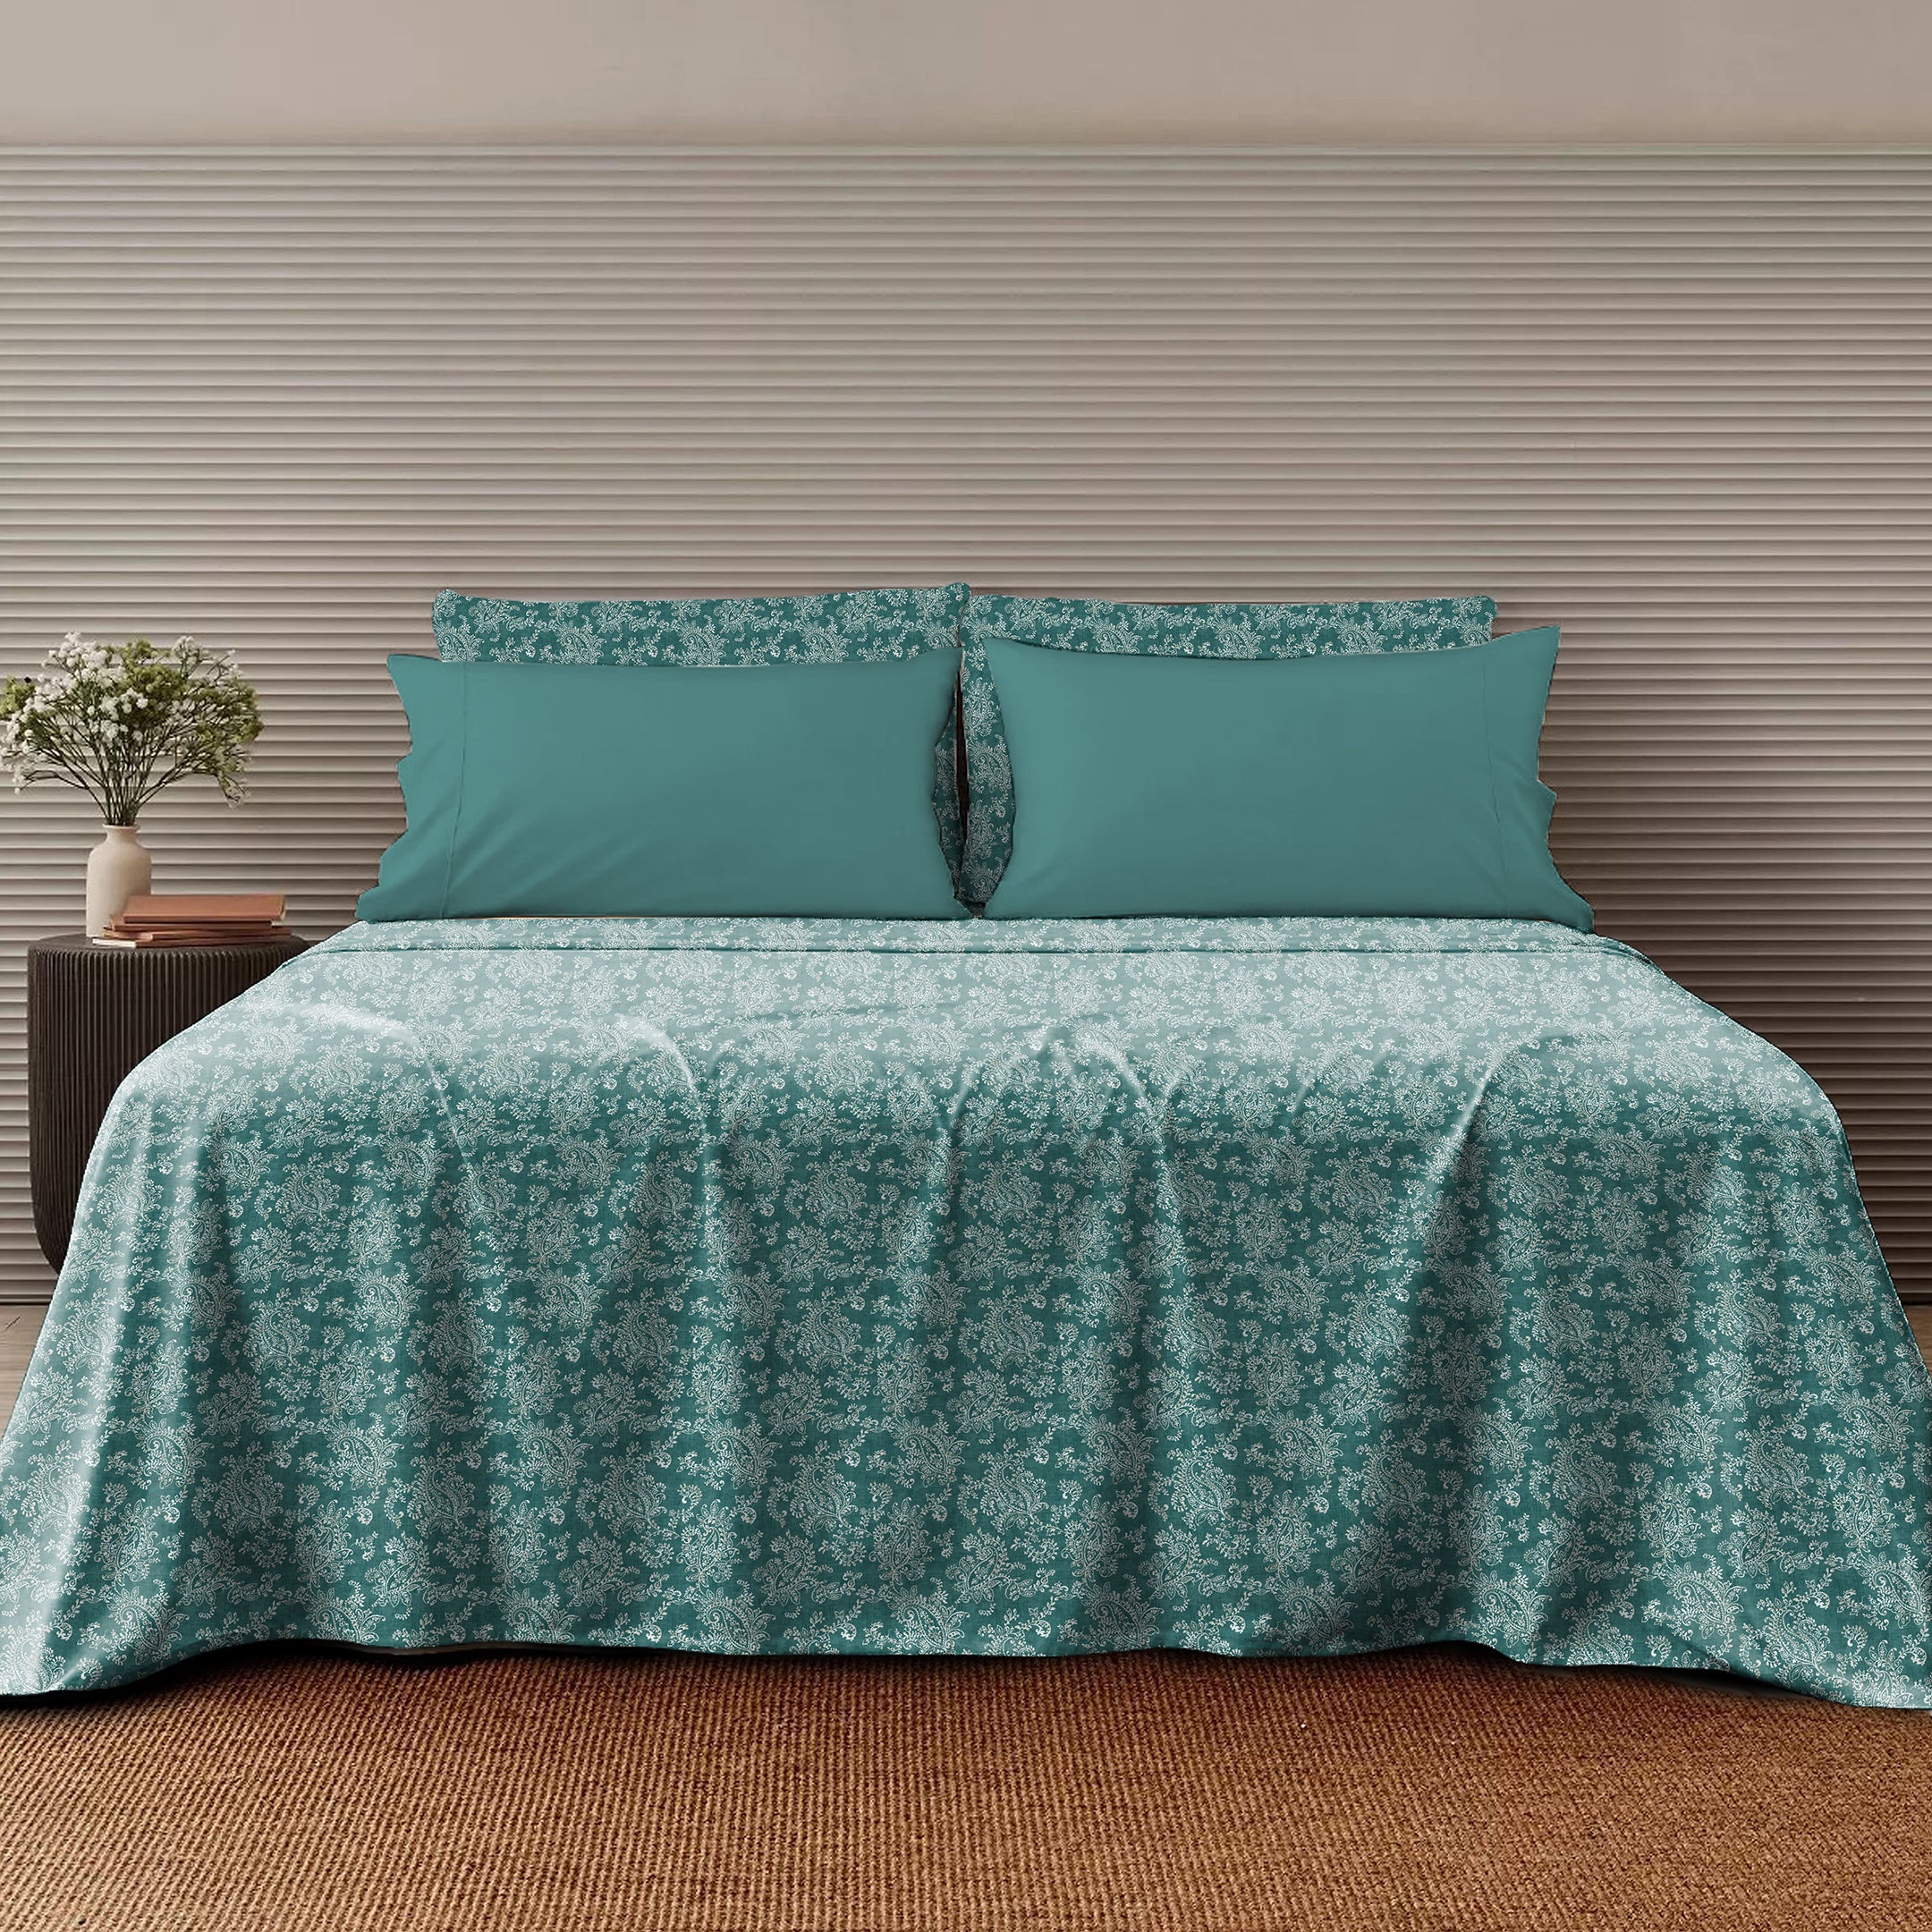 Jodhpur Flowers Bedsheet for Double Bed with 2 PillowCovers King Size (104" X 90") Teal